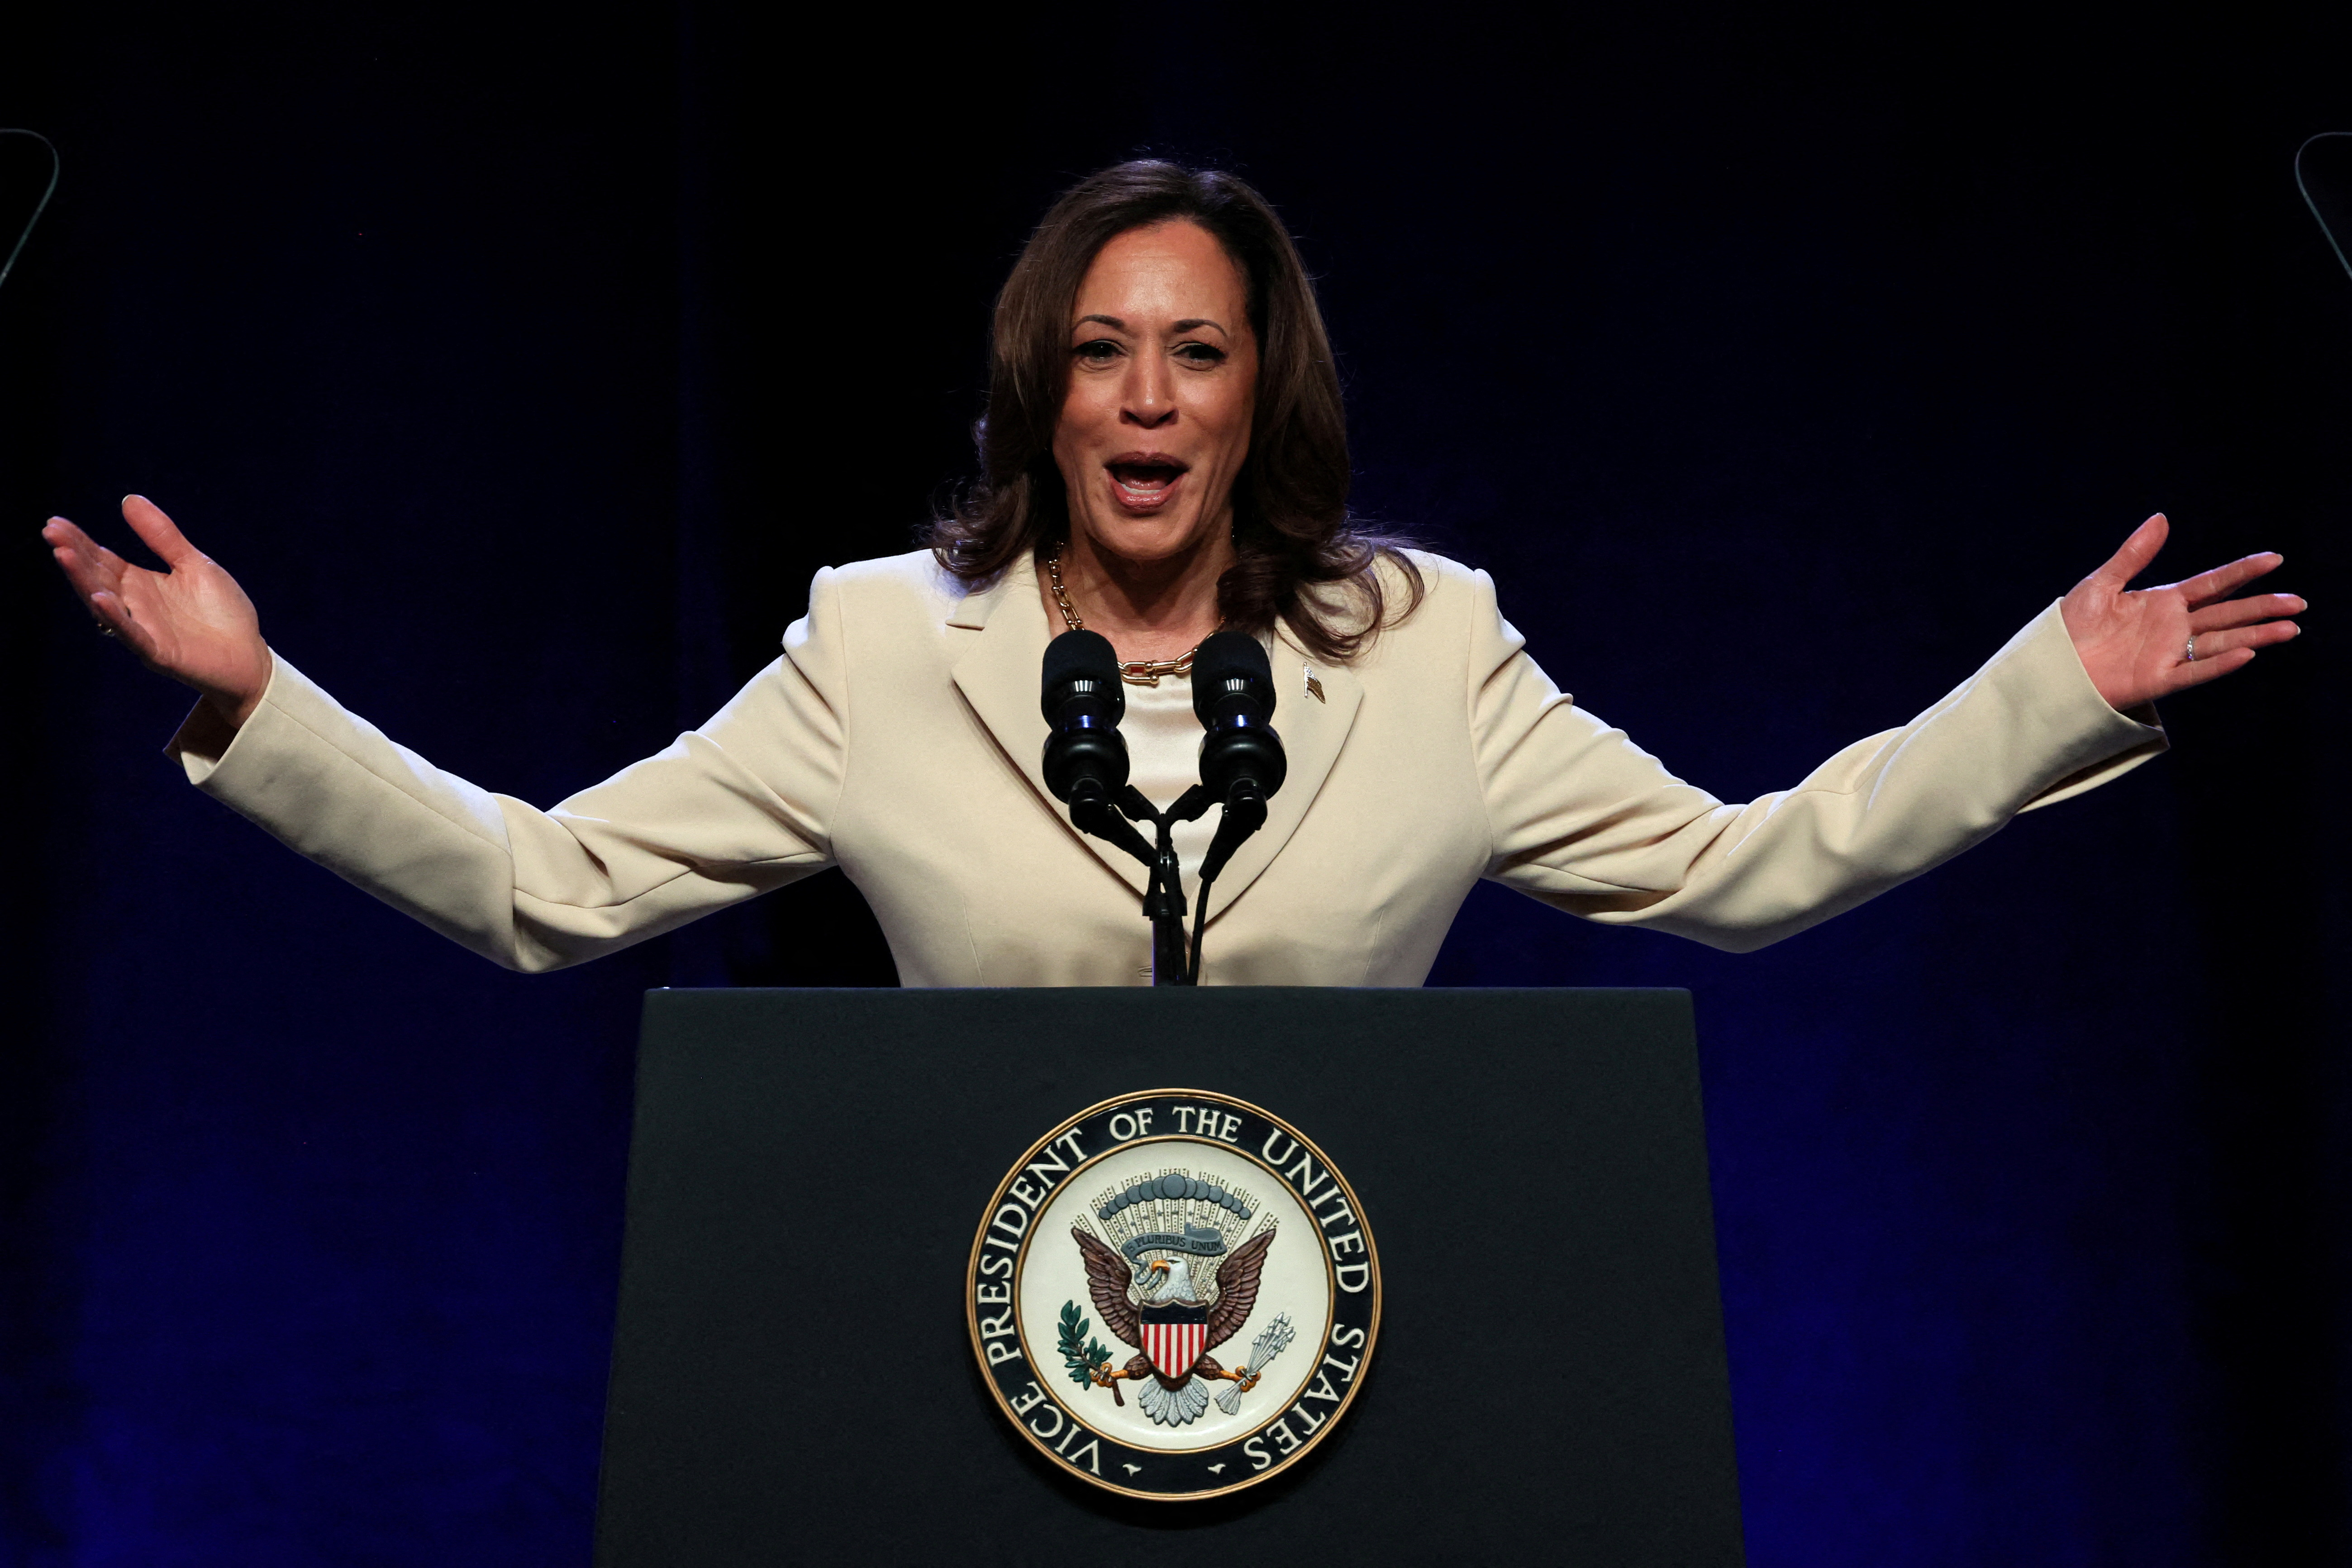 U.S. Vice President Kamala Harris speaks during the Constitutional Convention of UNITE HERE in New York